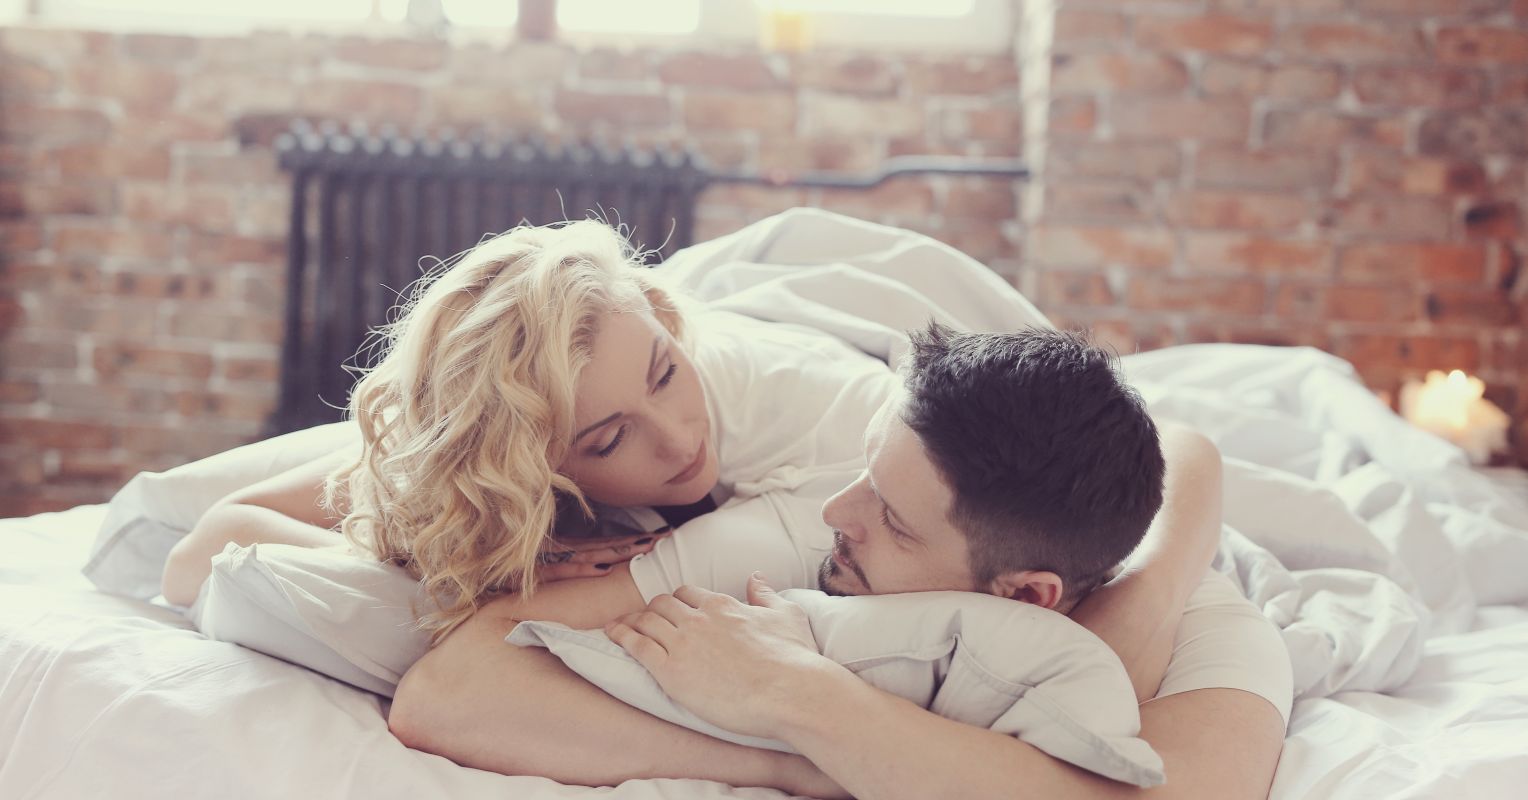 How Many Sex Partners Does It Really Take to Be Happy? Psychology Today pic